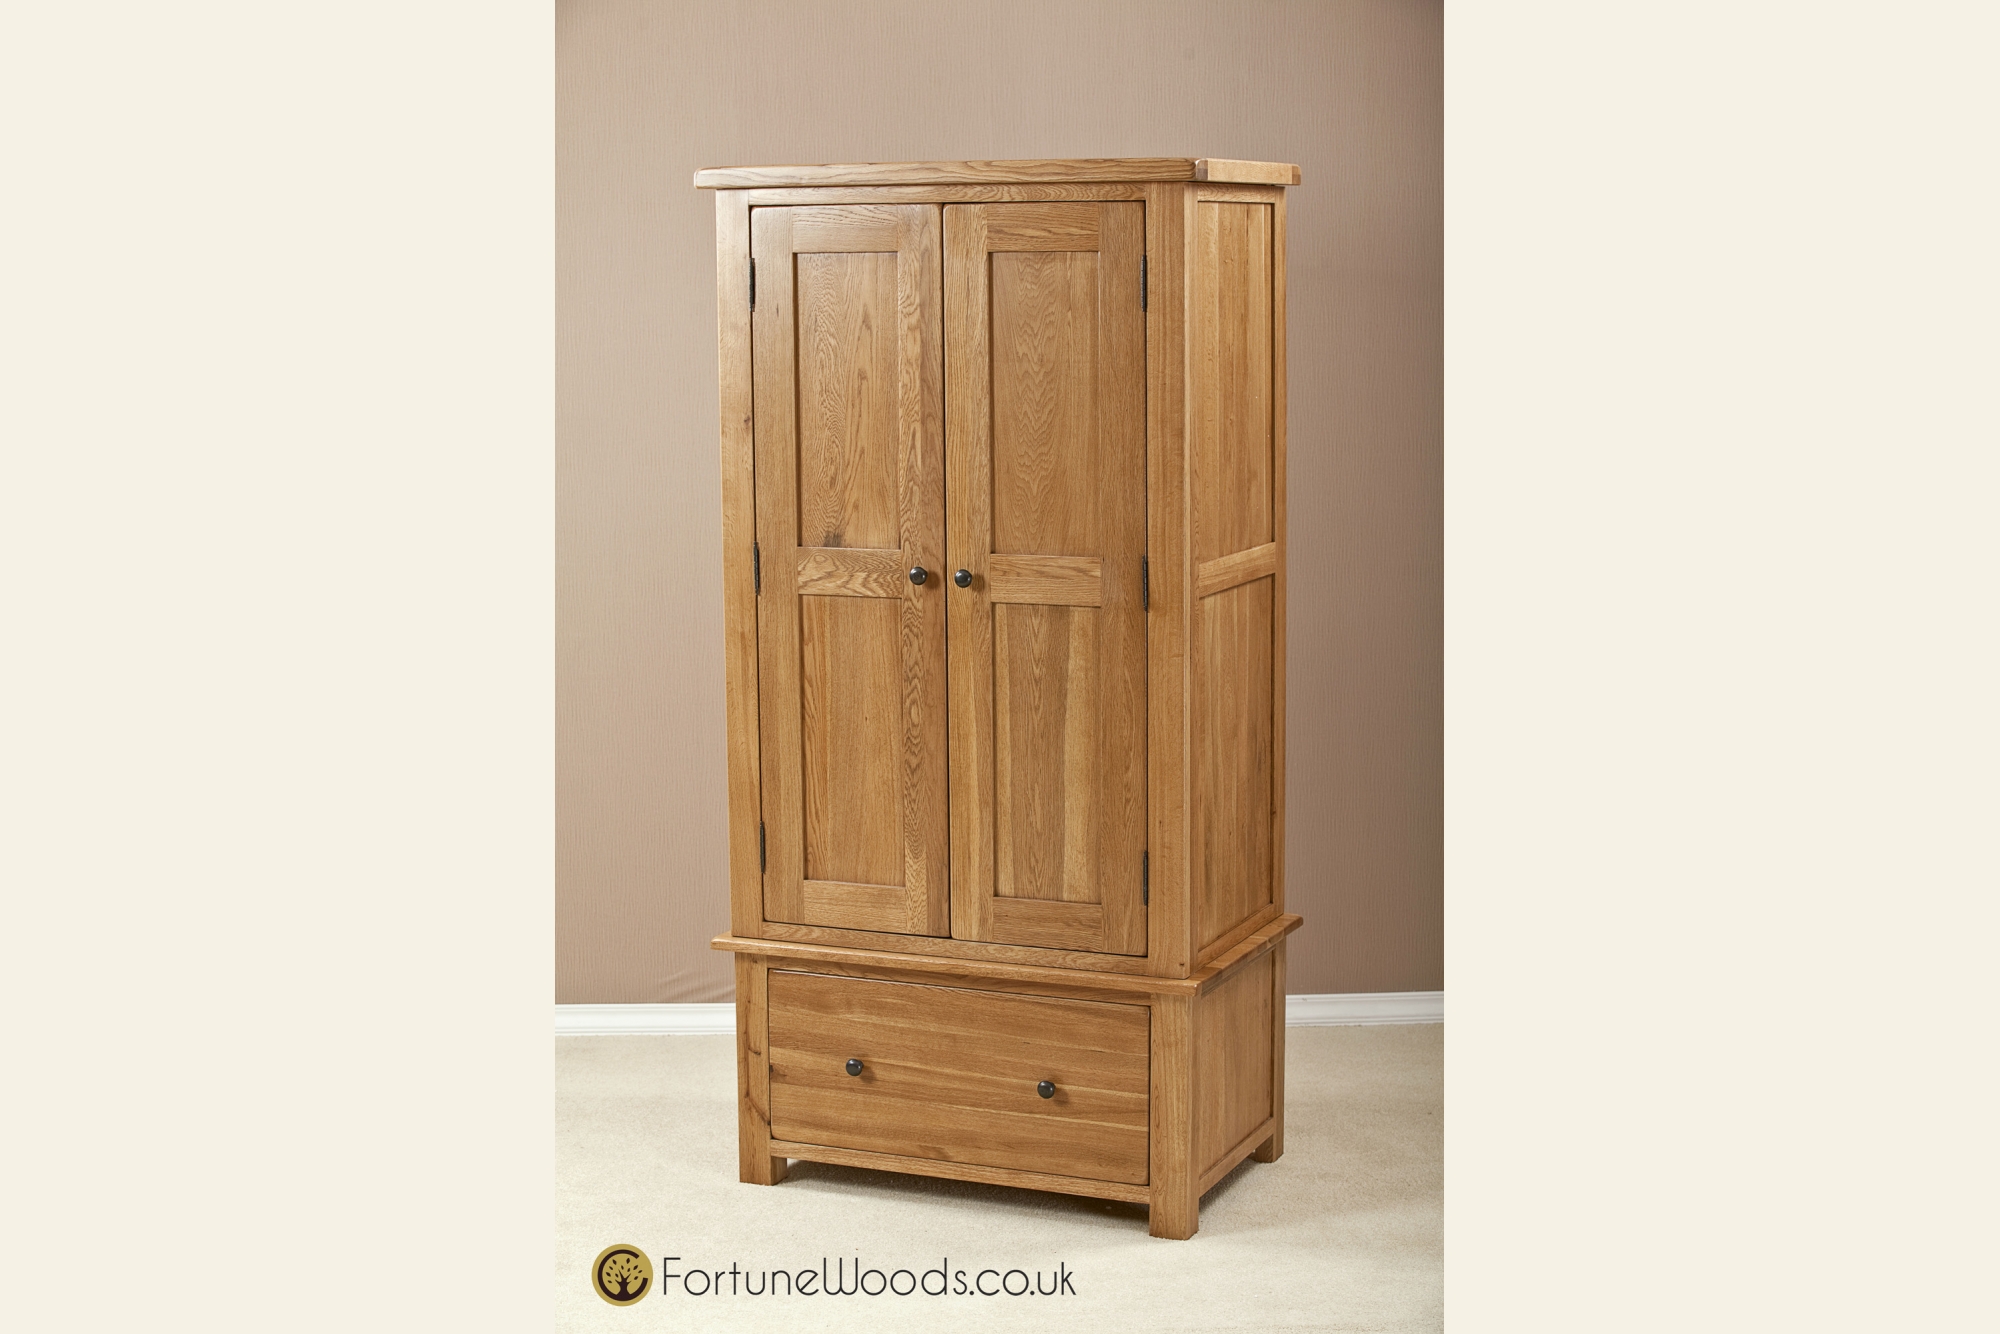 Fortune Woods Cotswold 1 Drawer Wardrobe